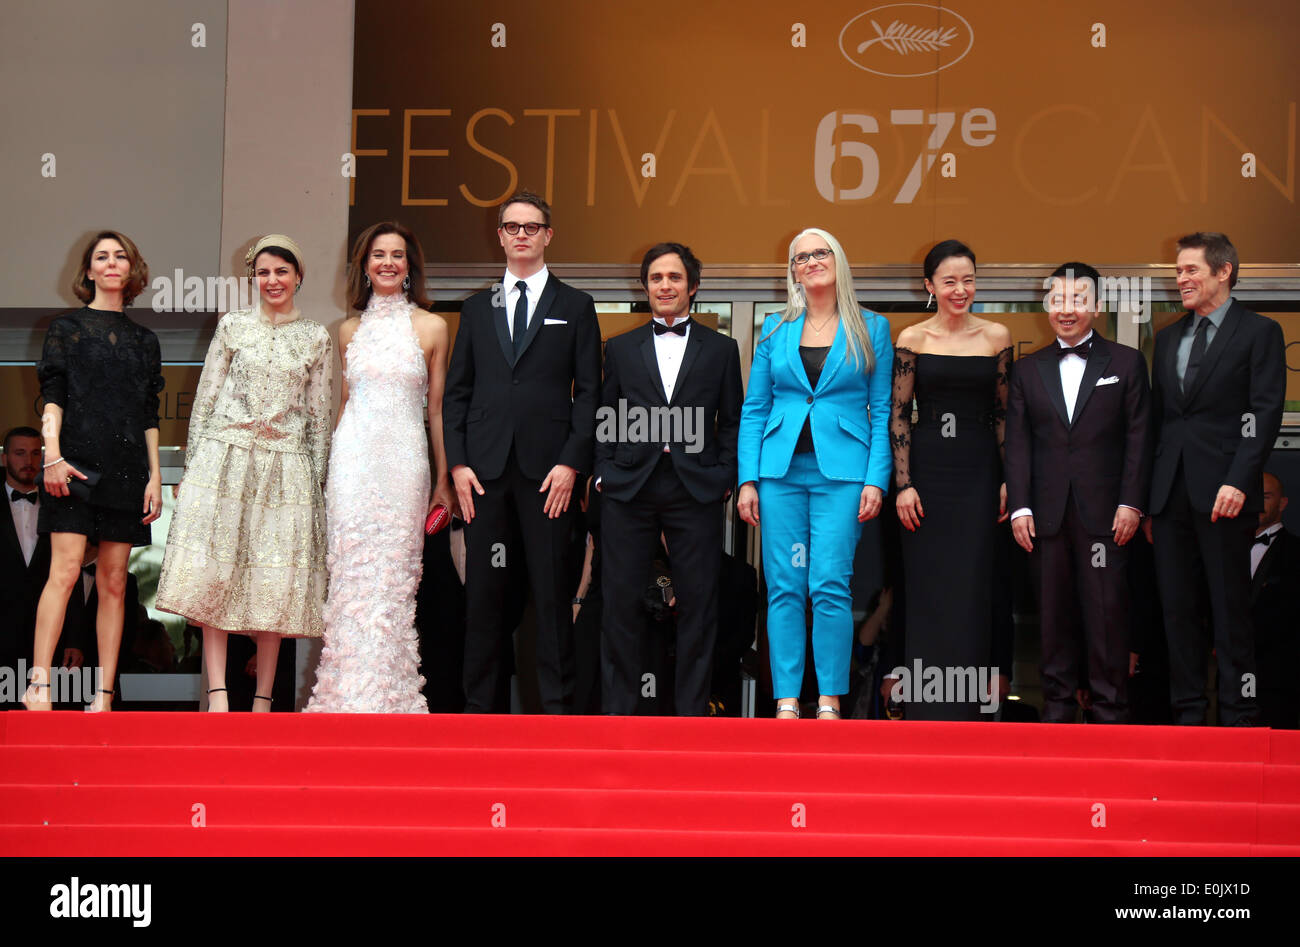 (L-R) Jury members, US director Sofia Coppola, Iranian actress Leila Hatami, French actress Carole Bouquet, Danish director Nicolas Winding Refn, Mexican actor Gael Garcia Bernal, New Zealand director Jane Campion, Korean actress Jeon Do-yeon, Chinese director Jia Zhangke and US actor Willem Dafoe arrive for the screening of the movie 'Grace of Monaco' and the Opening Ceremony of the 67th annual Cannes Film Festival in Cannes, France, 14 May 2014. Presented out of competition, the movie opens the festival which runs from 14 to 25 May. Photo: Hubert Boesl - NO WIRE SERVICE Stock Photo